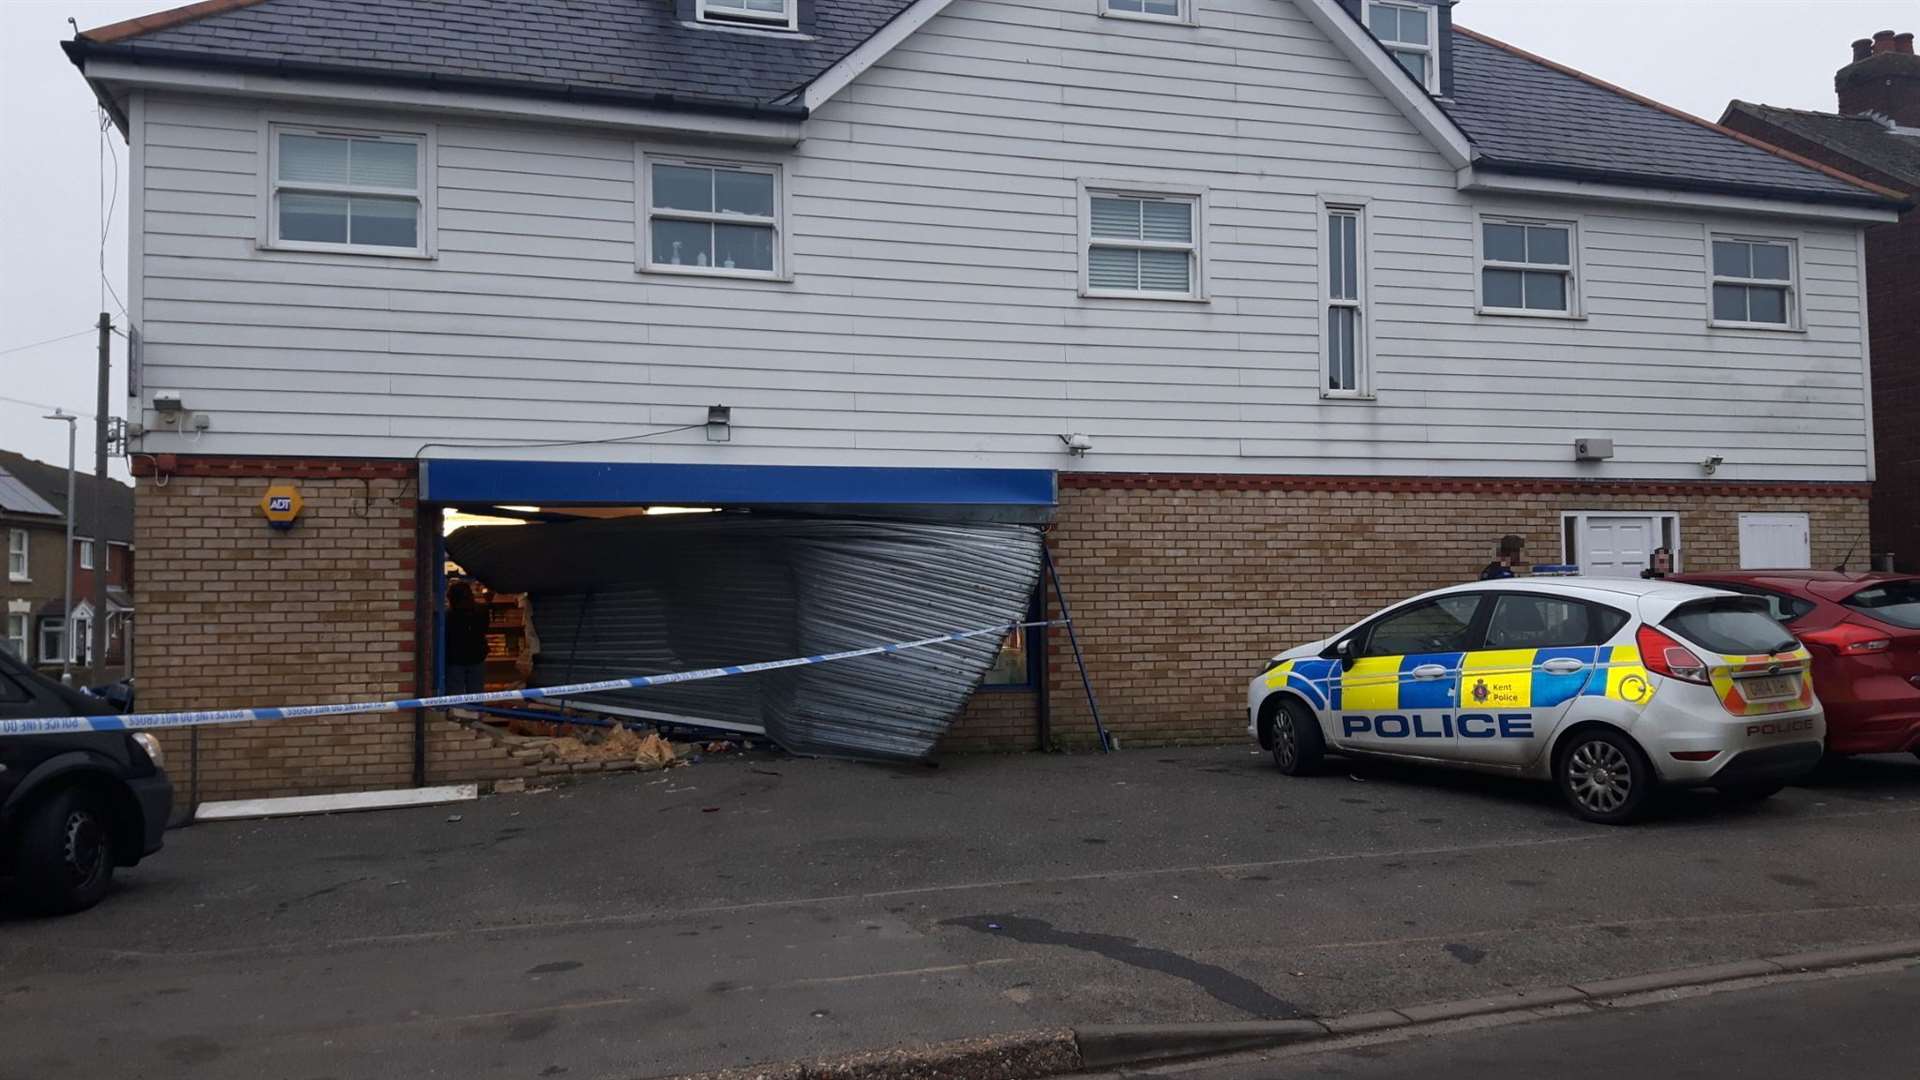 A vehicle smashed into the shop at Orchard Avenue, Deal